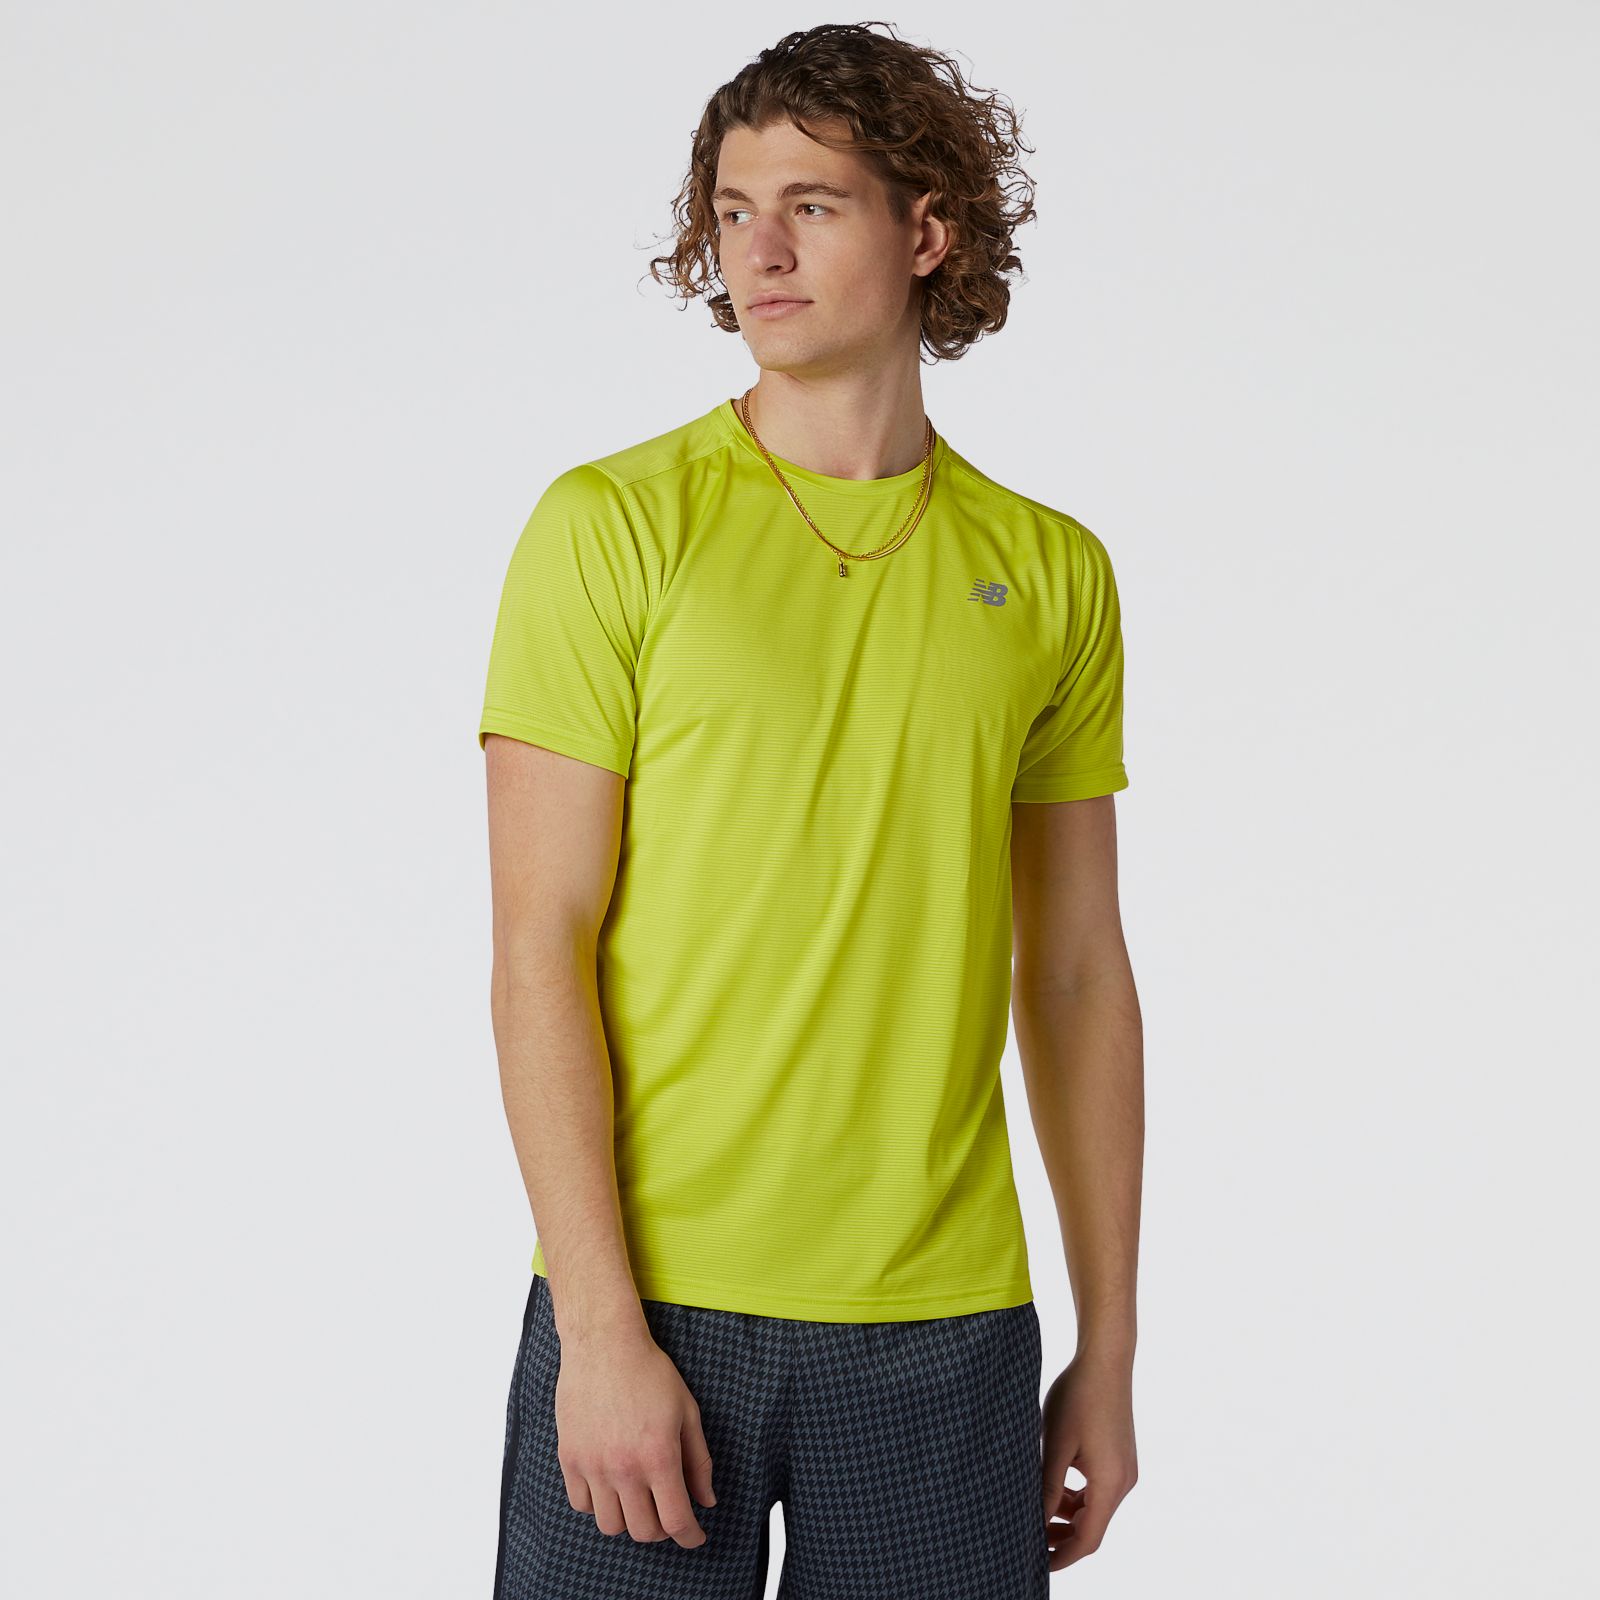 New Balance Accelerate Short Sleeve MT03203, Lime, swatch